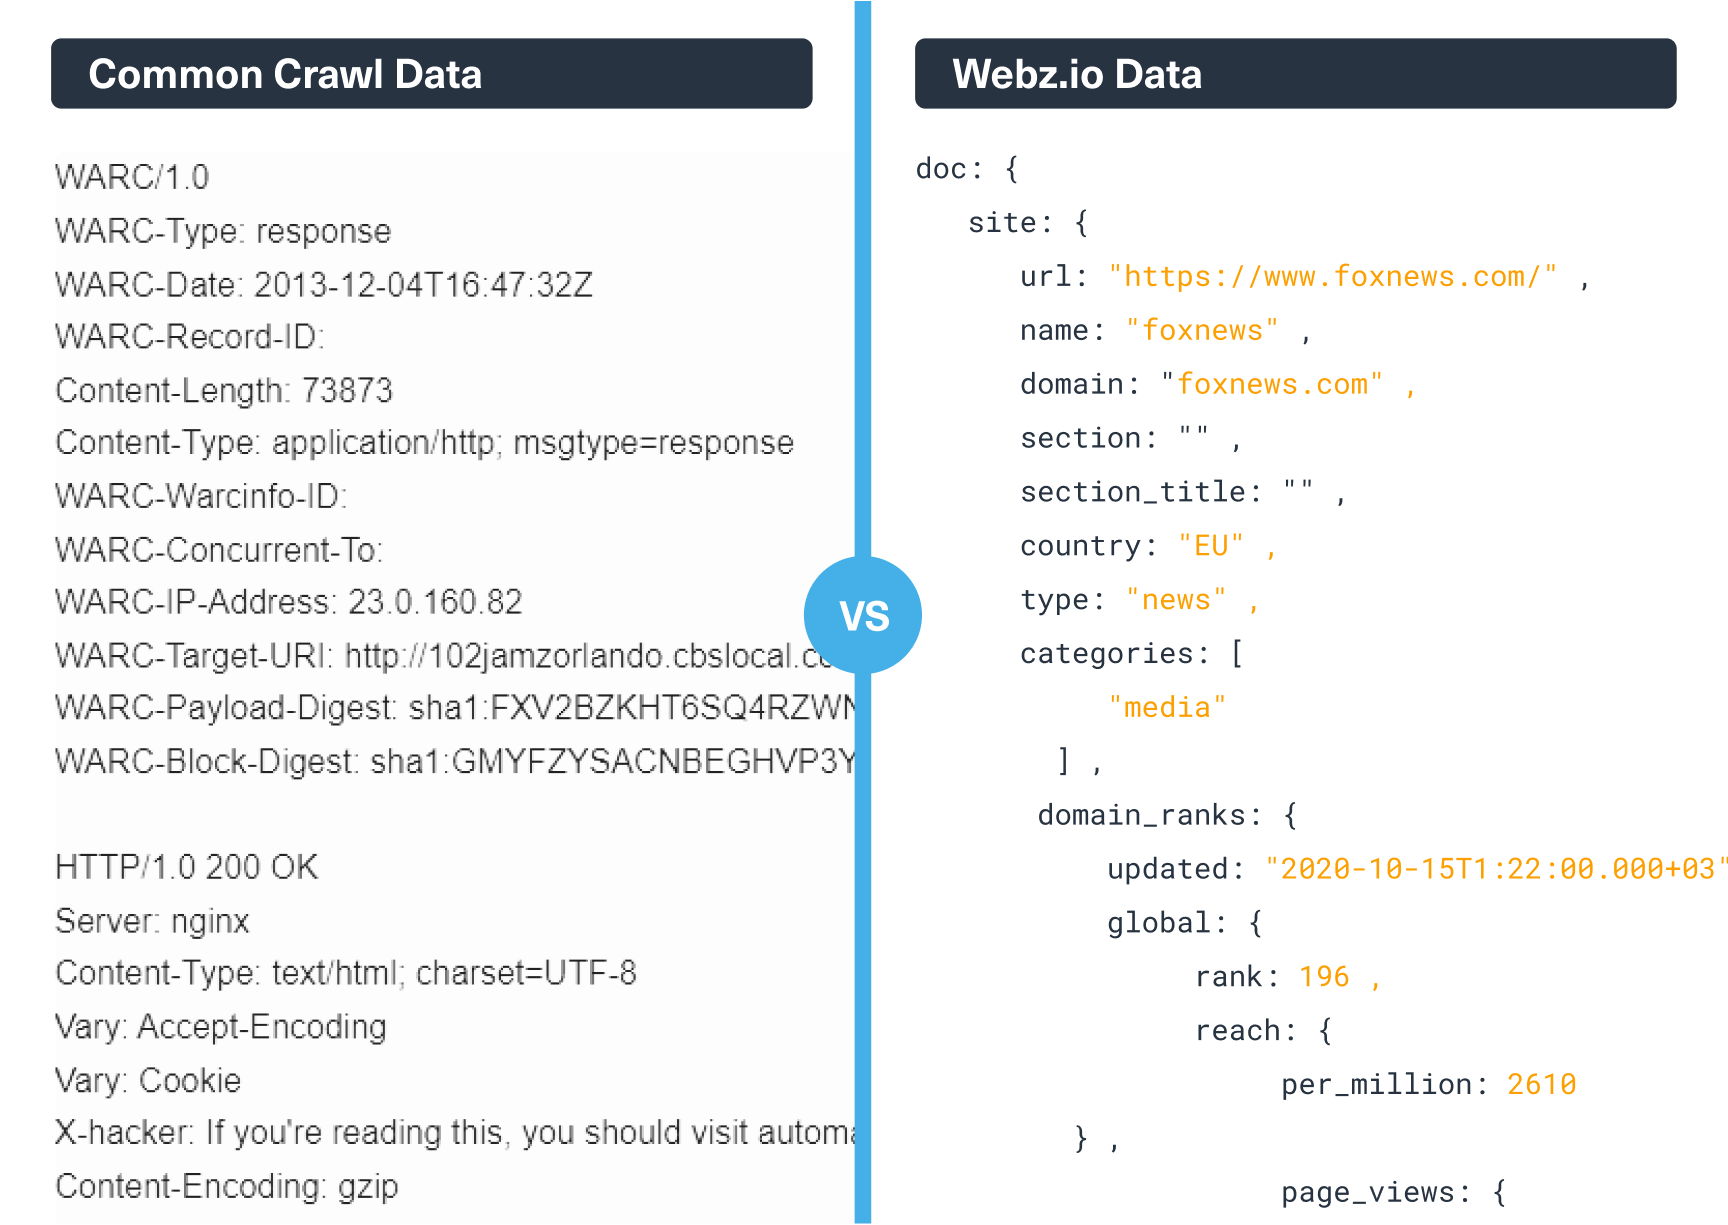 The way the data looks on Common Crawl and on Webz.io